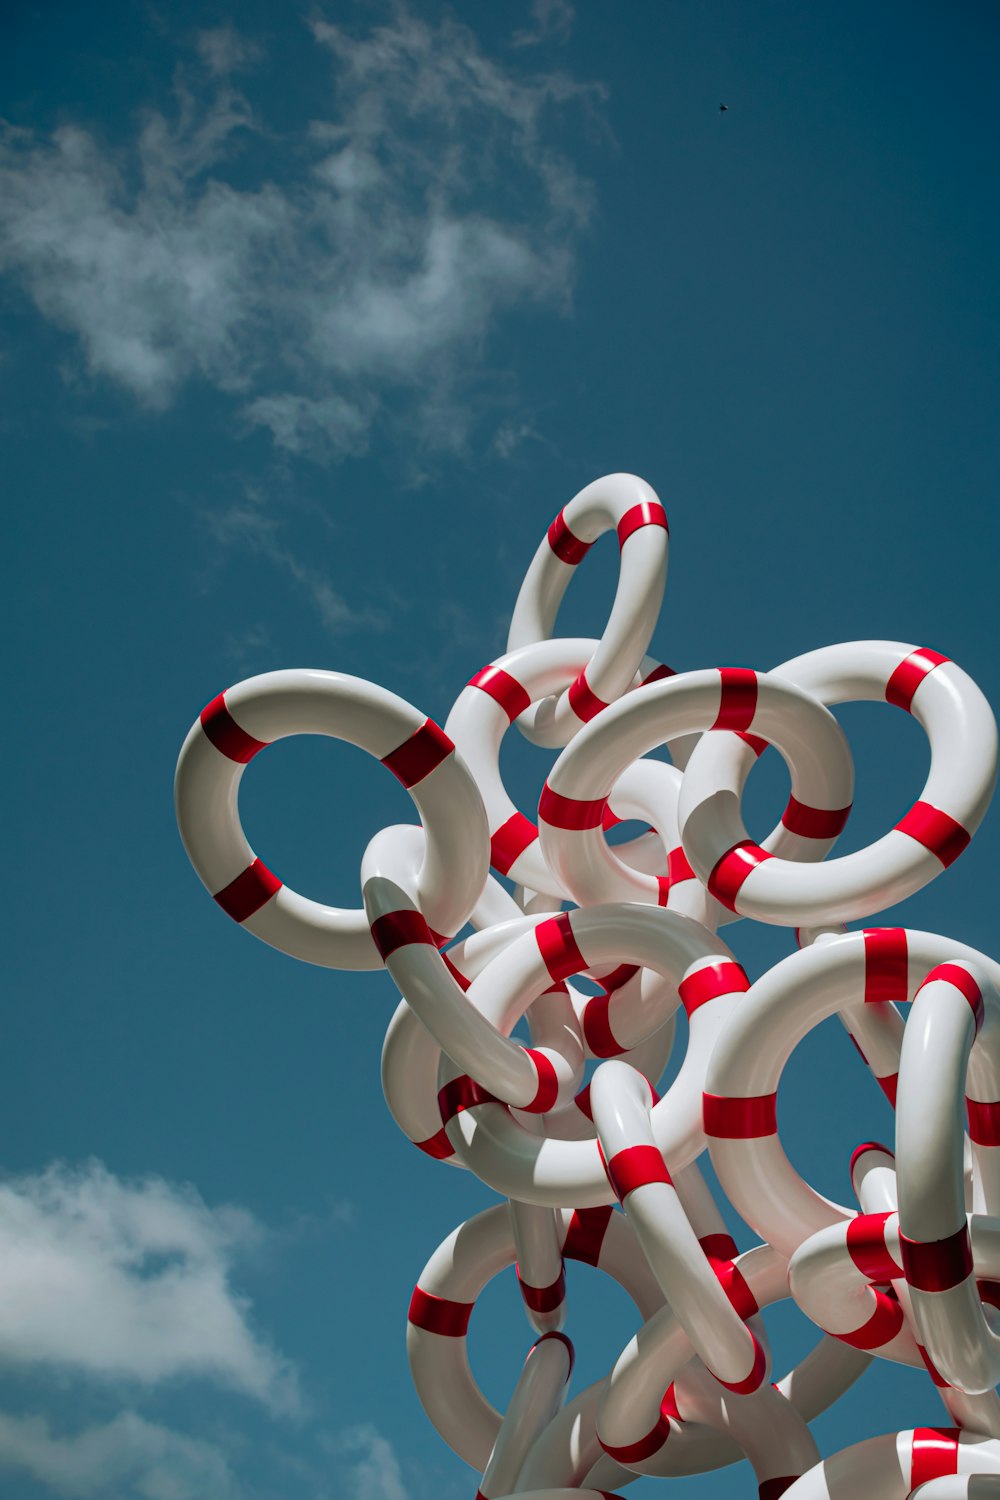 a large sculpture of red and white candy canes